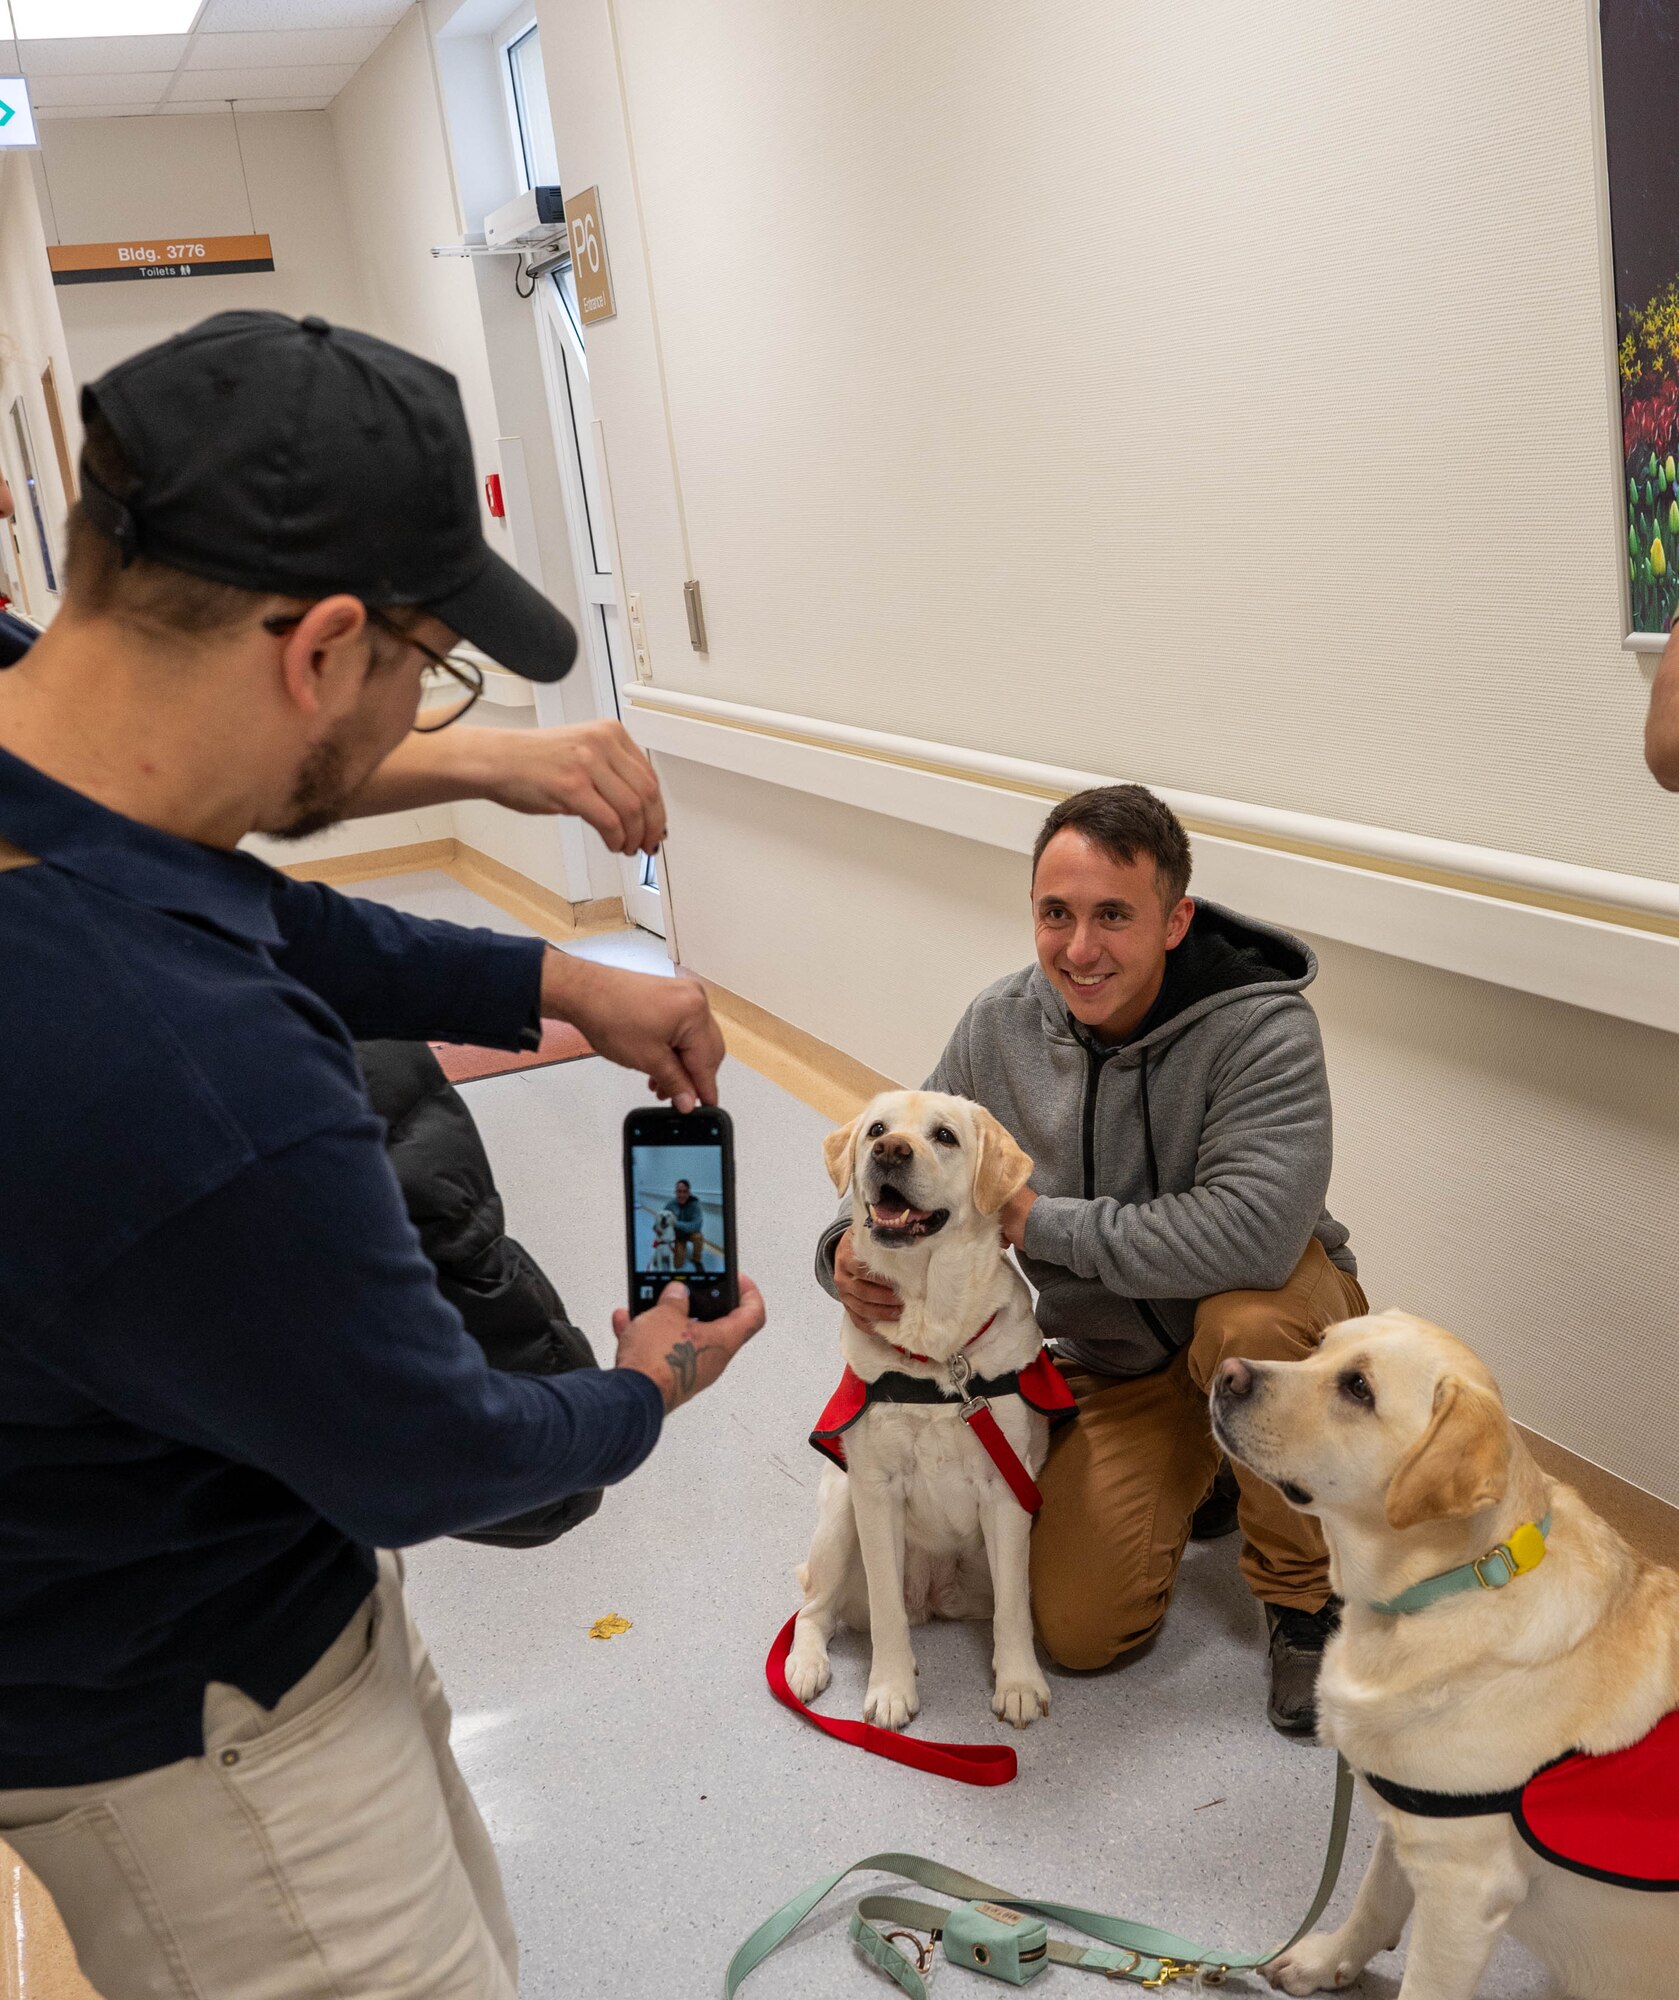 Photos are taken of dogs with visitors of hospital.